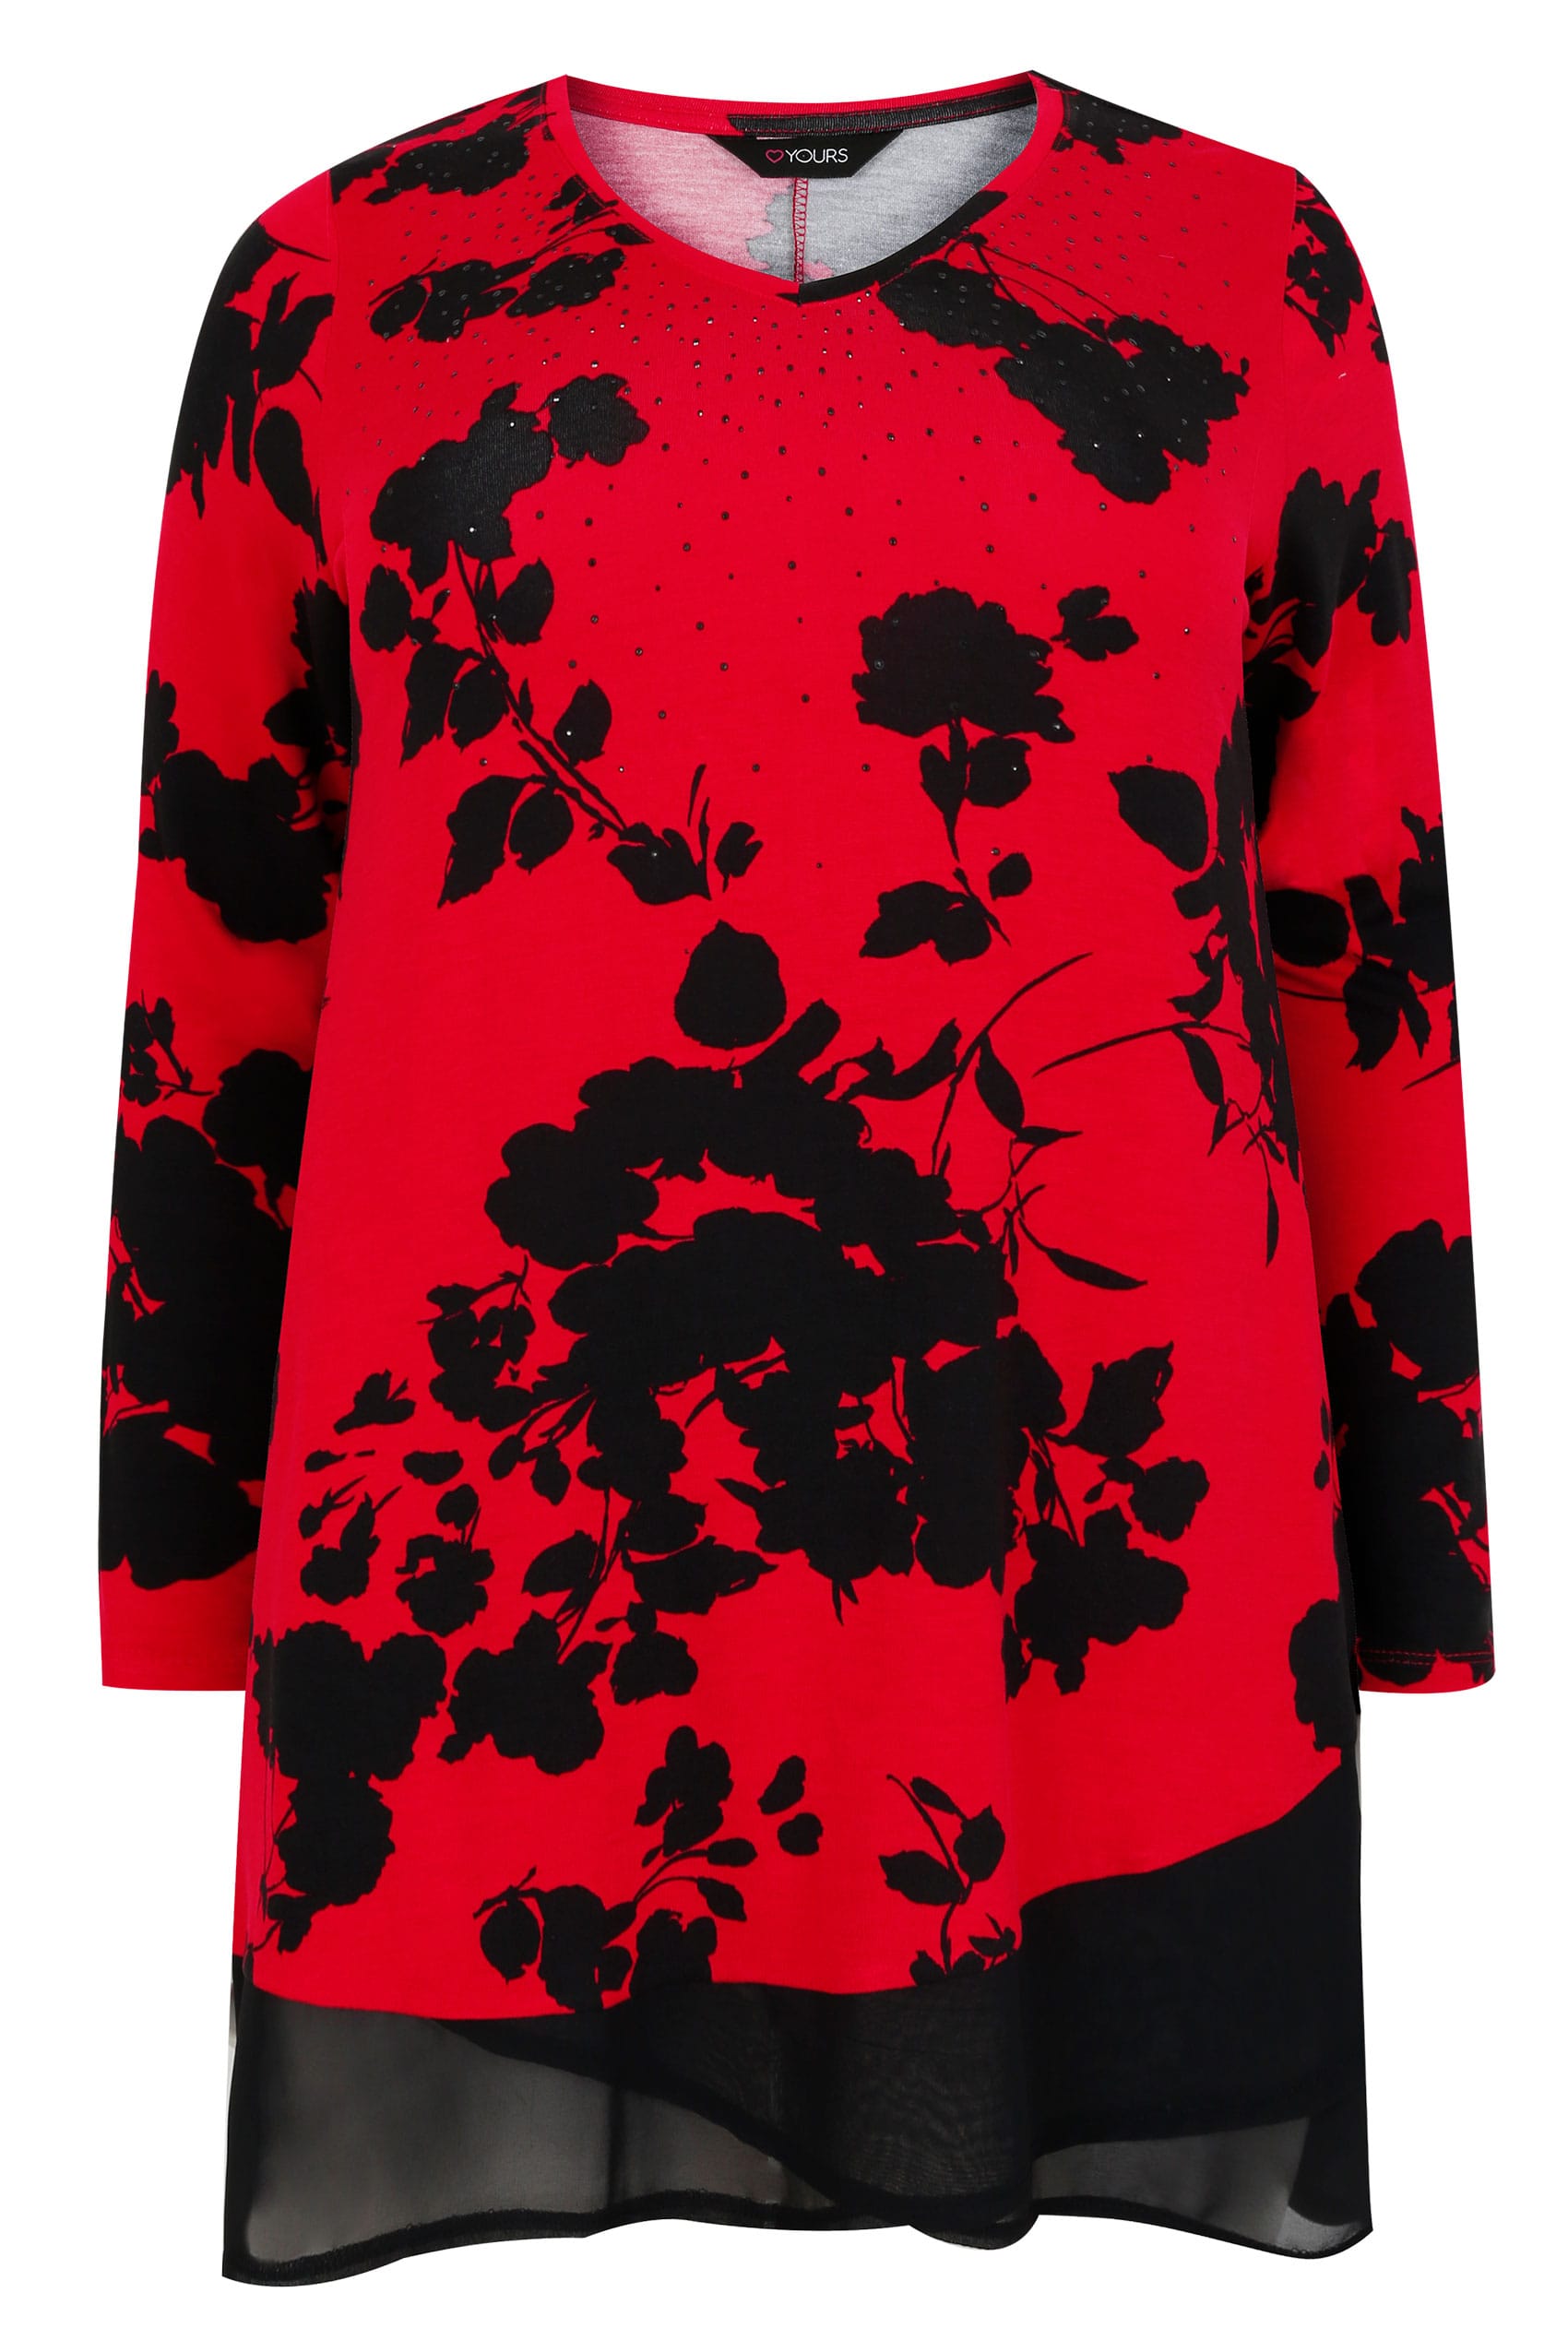 Red & Black Floral Print Top With Chiffon Hem, Plus size 16 to 36